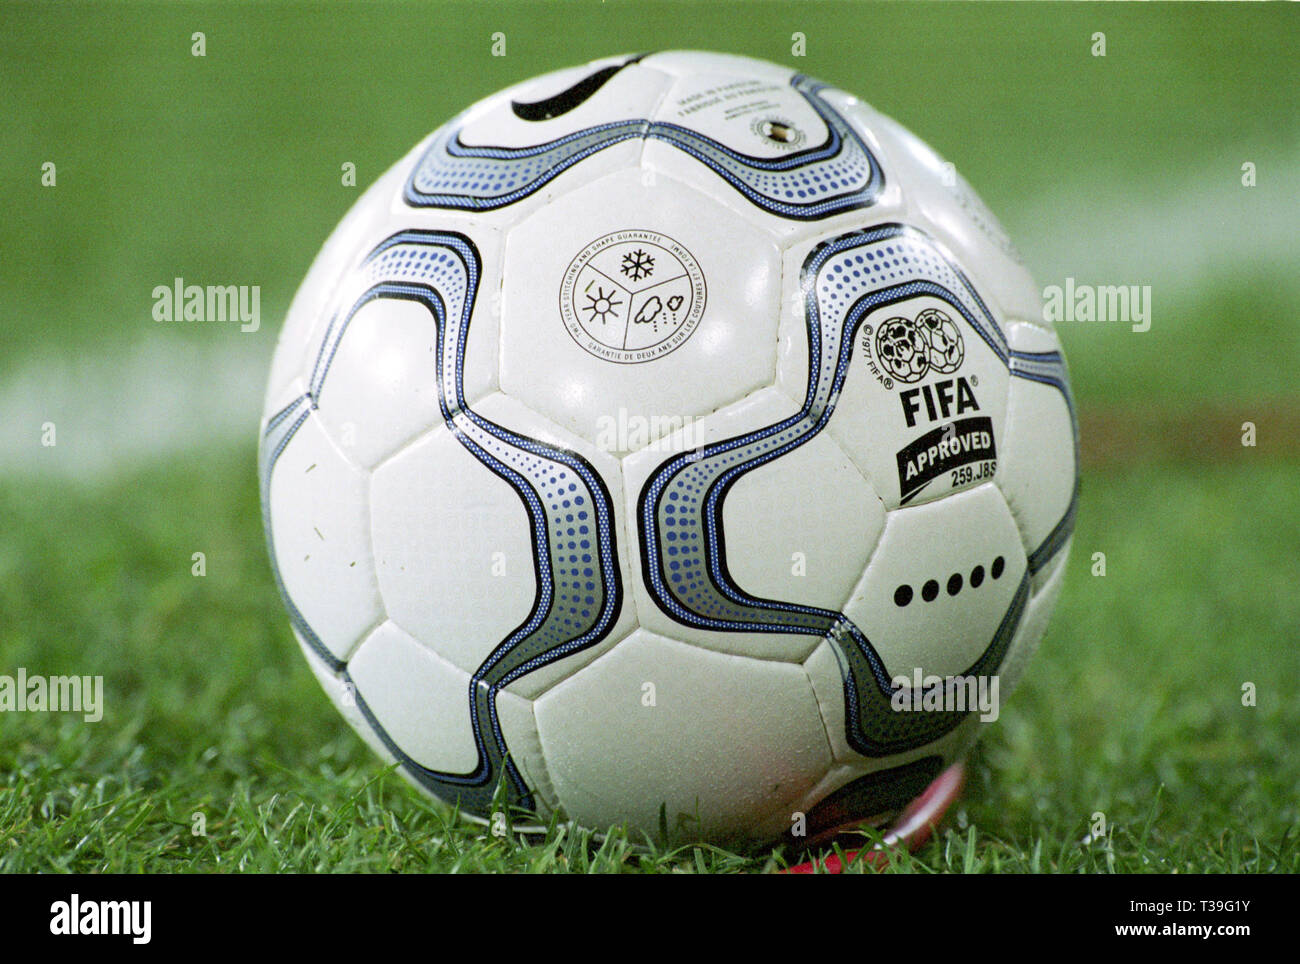 The Nike Geo Ball High Resolution Stock Photography and Images - Alamy